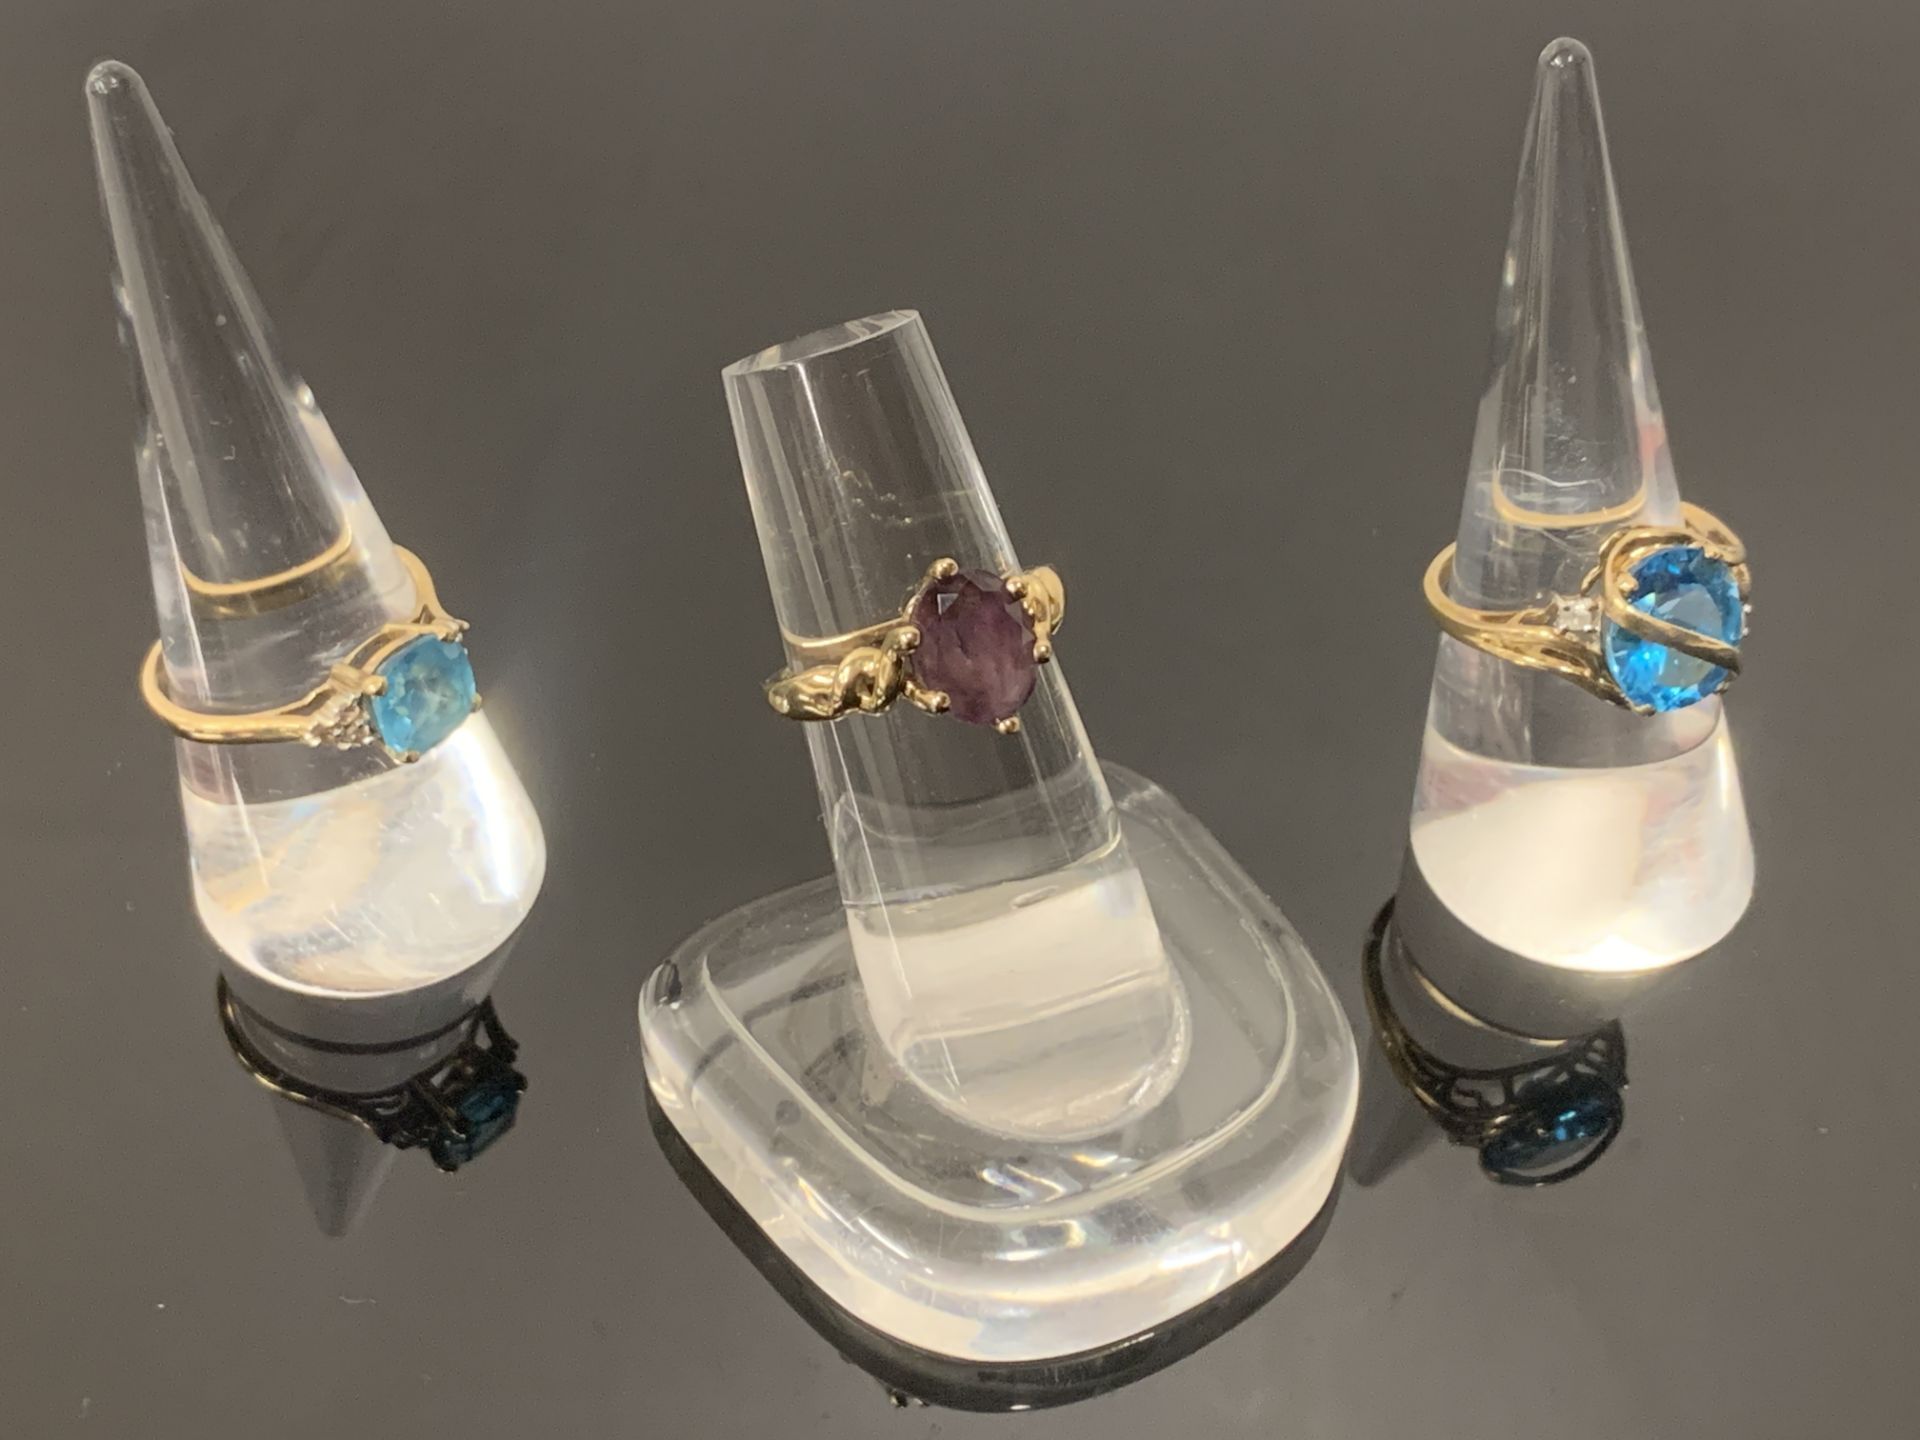 3 x 9ct yellow gold rings with blue/purple mounted stones (total 9g)